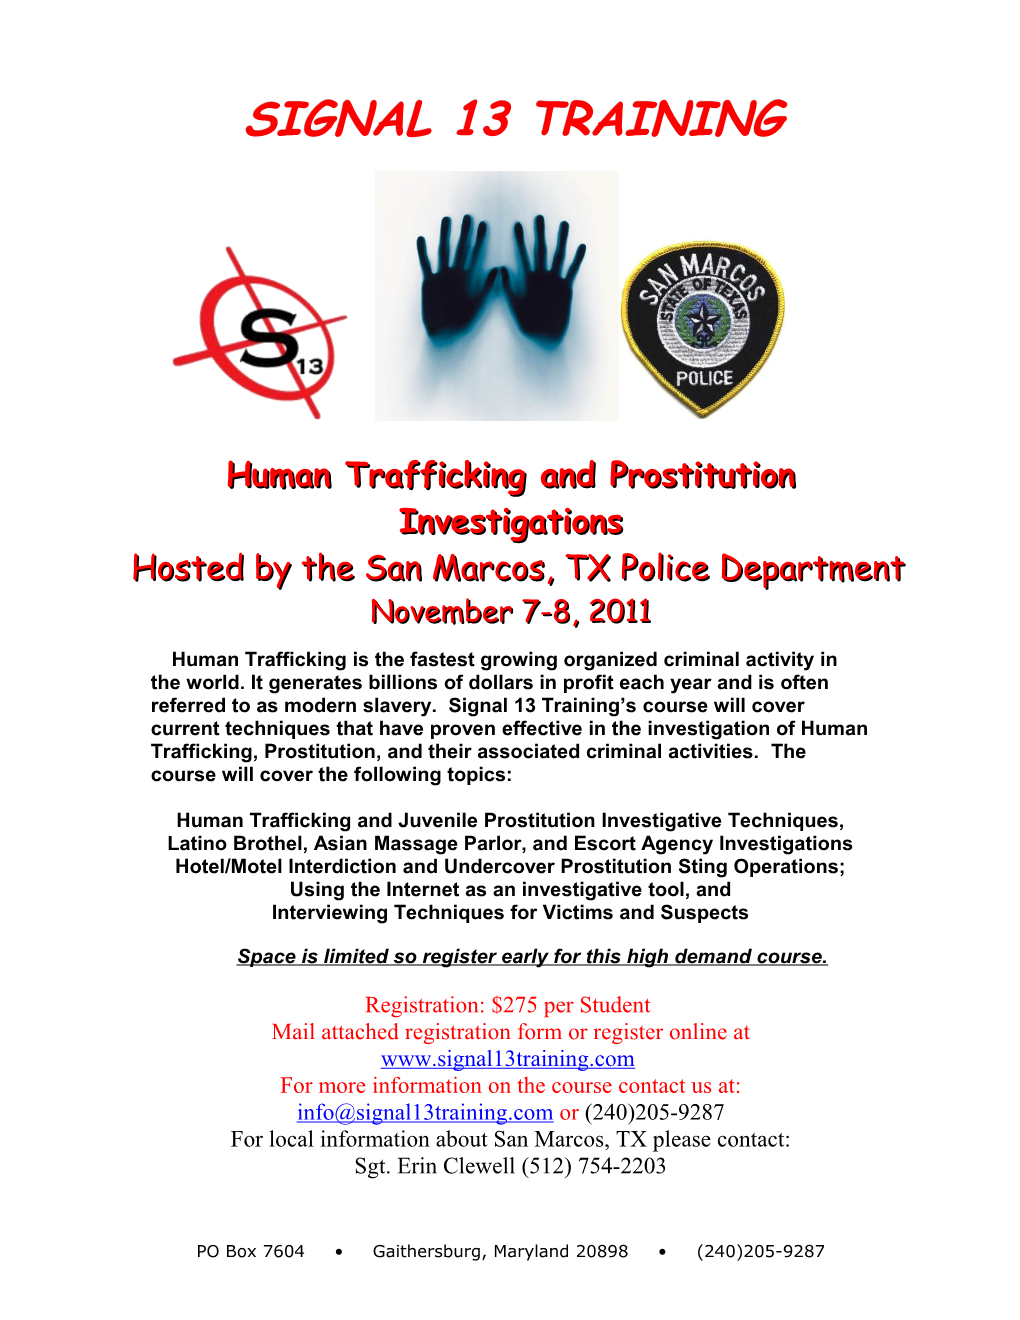 Human Trafficking and Prostitution Investigations